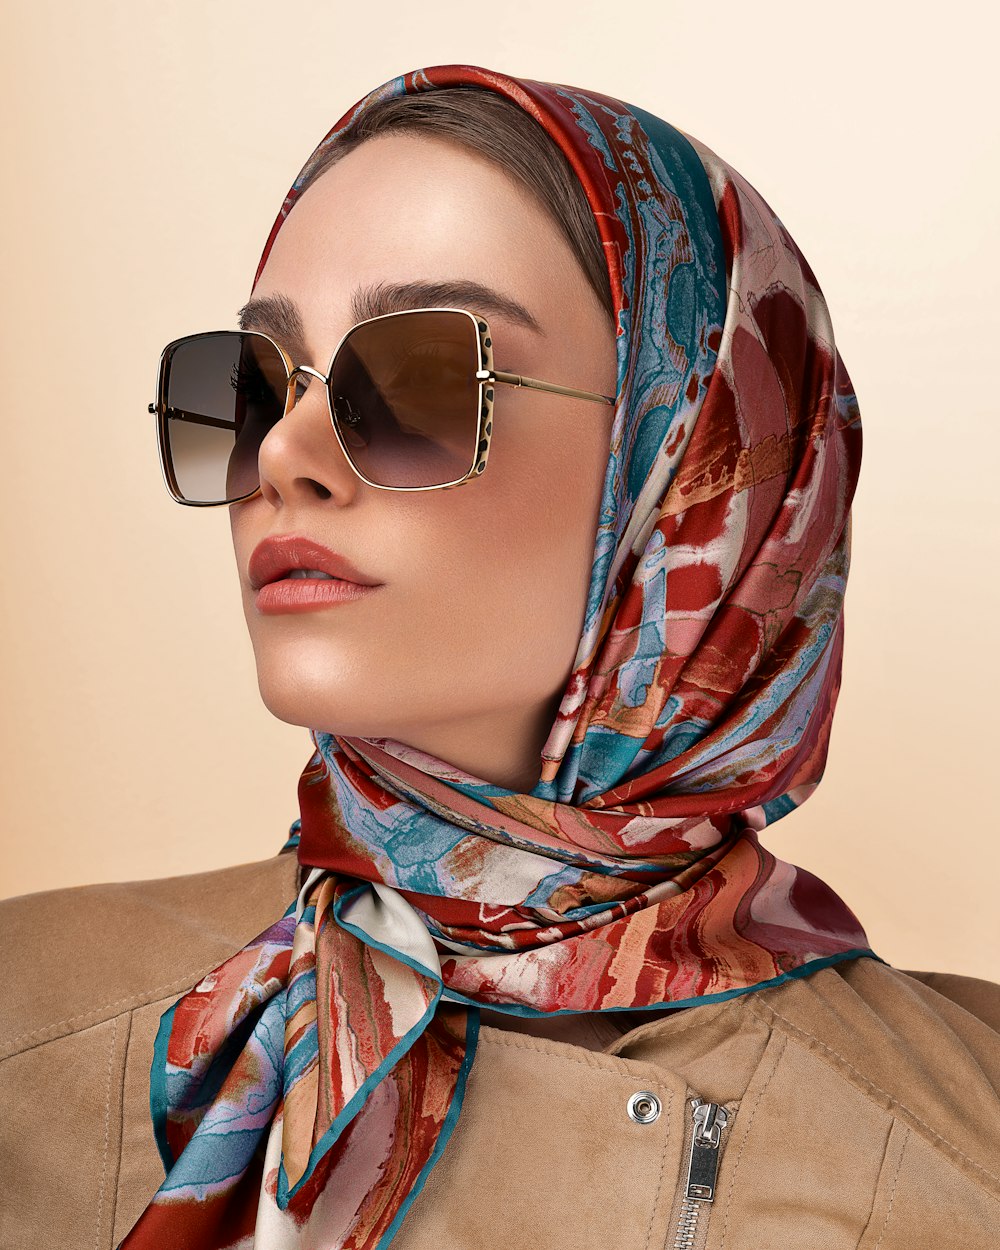 a person wearing a head scarf and sunglasses